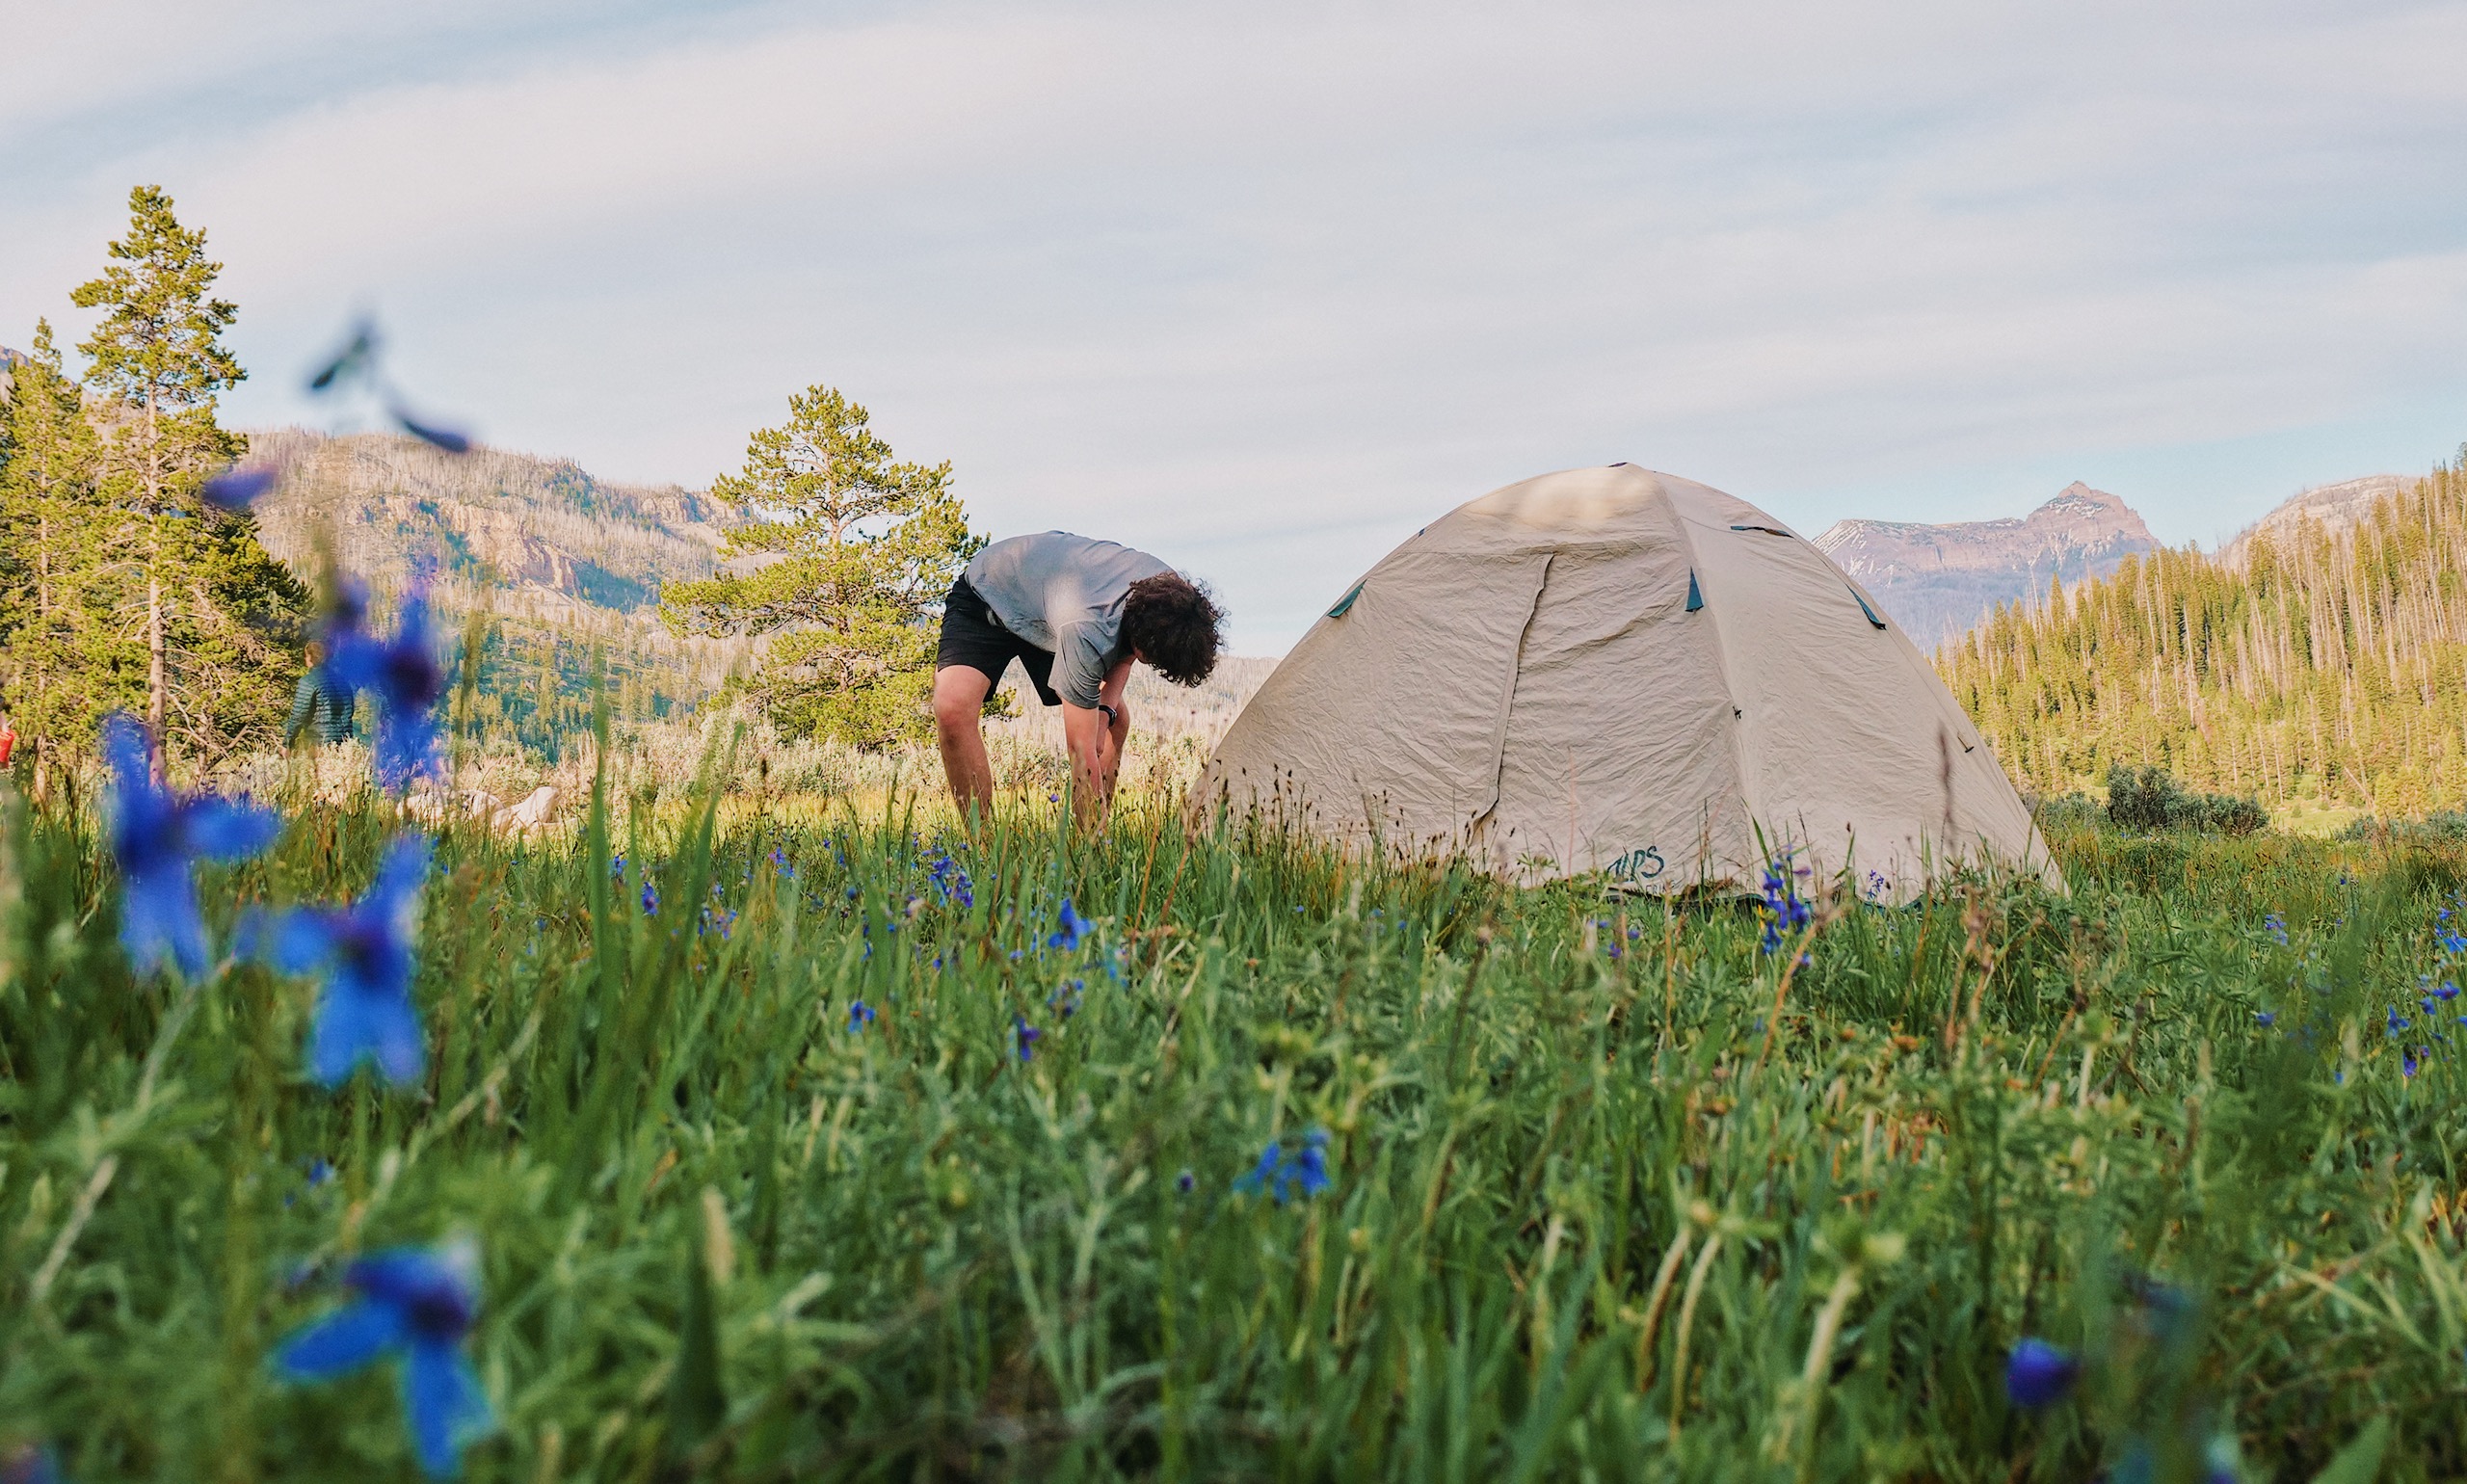 Person setting up a tent in a grassy field with blue flowers. 